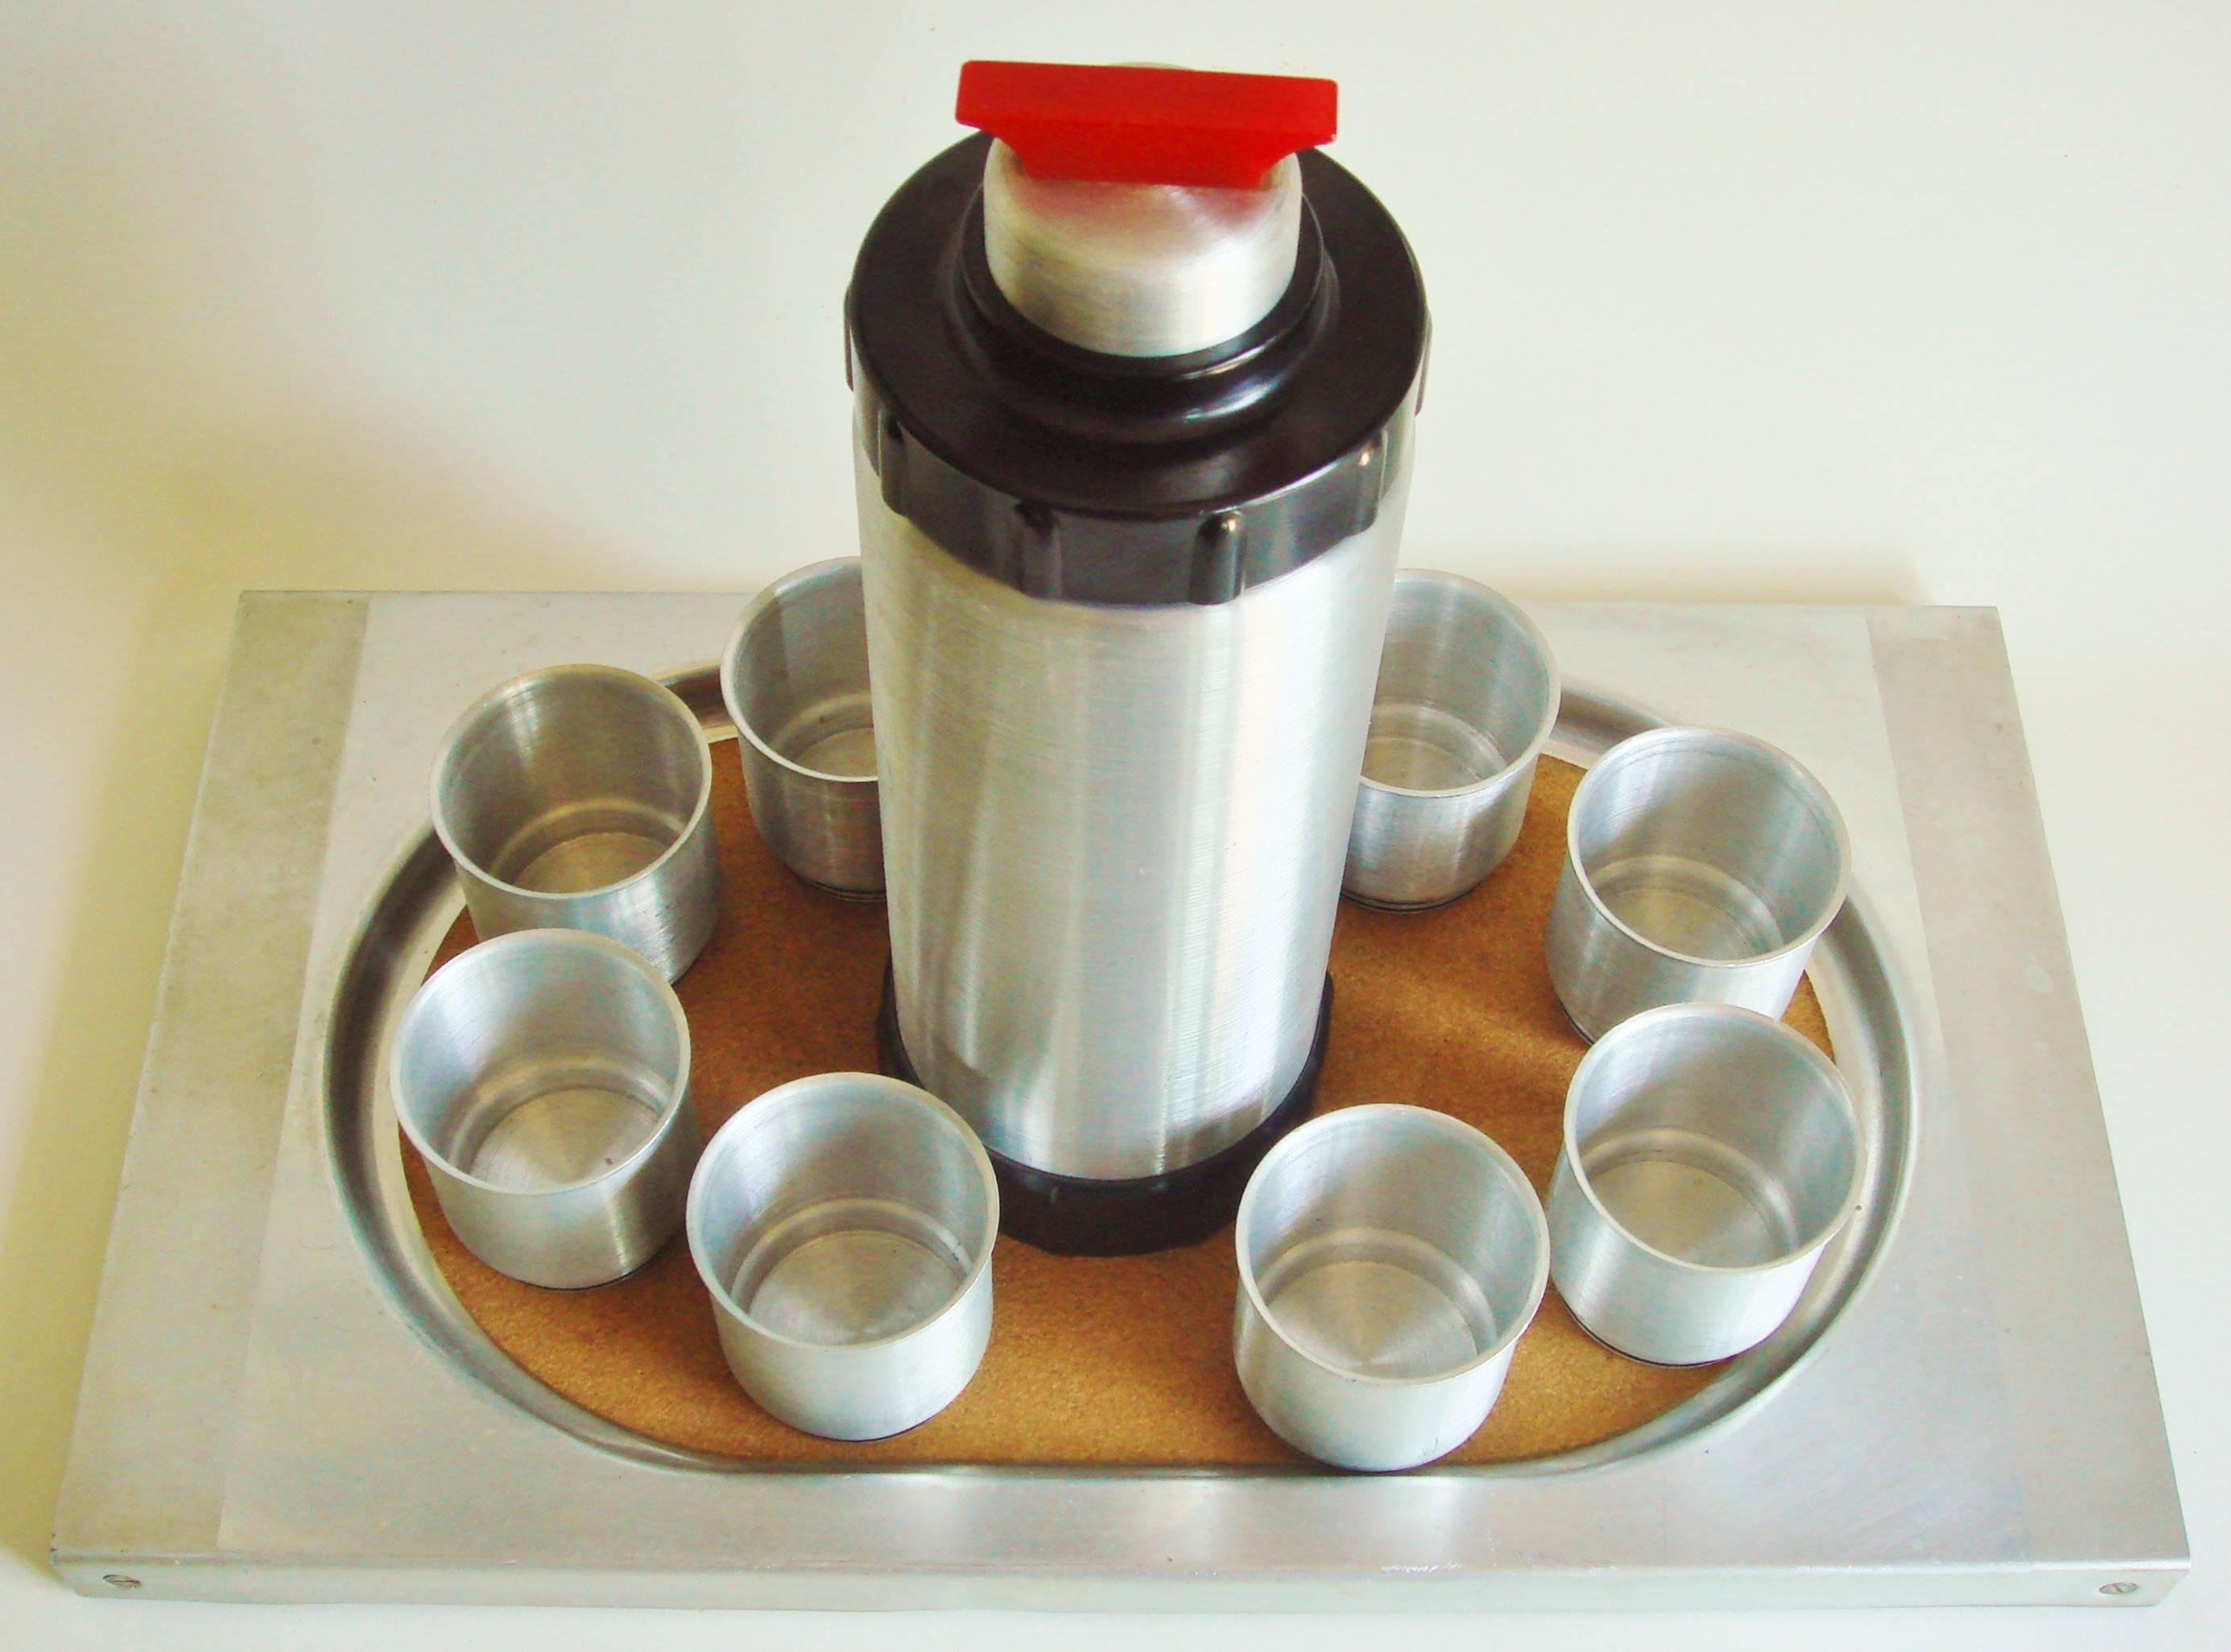 This rare and iconic American ten-piece cocktail shaker set was designed for the West Bend Company of Wisconsin by Ralph N. Kircher in 1934 (See US Patent below) and was marketed under the name of the 